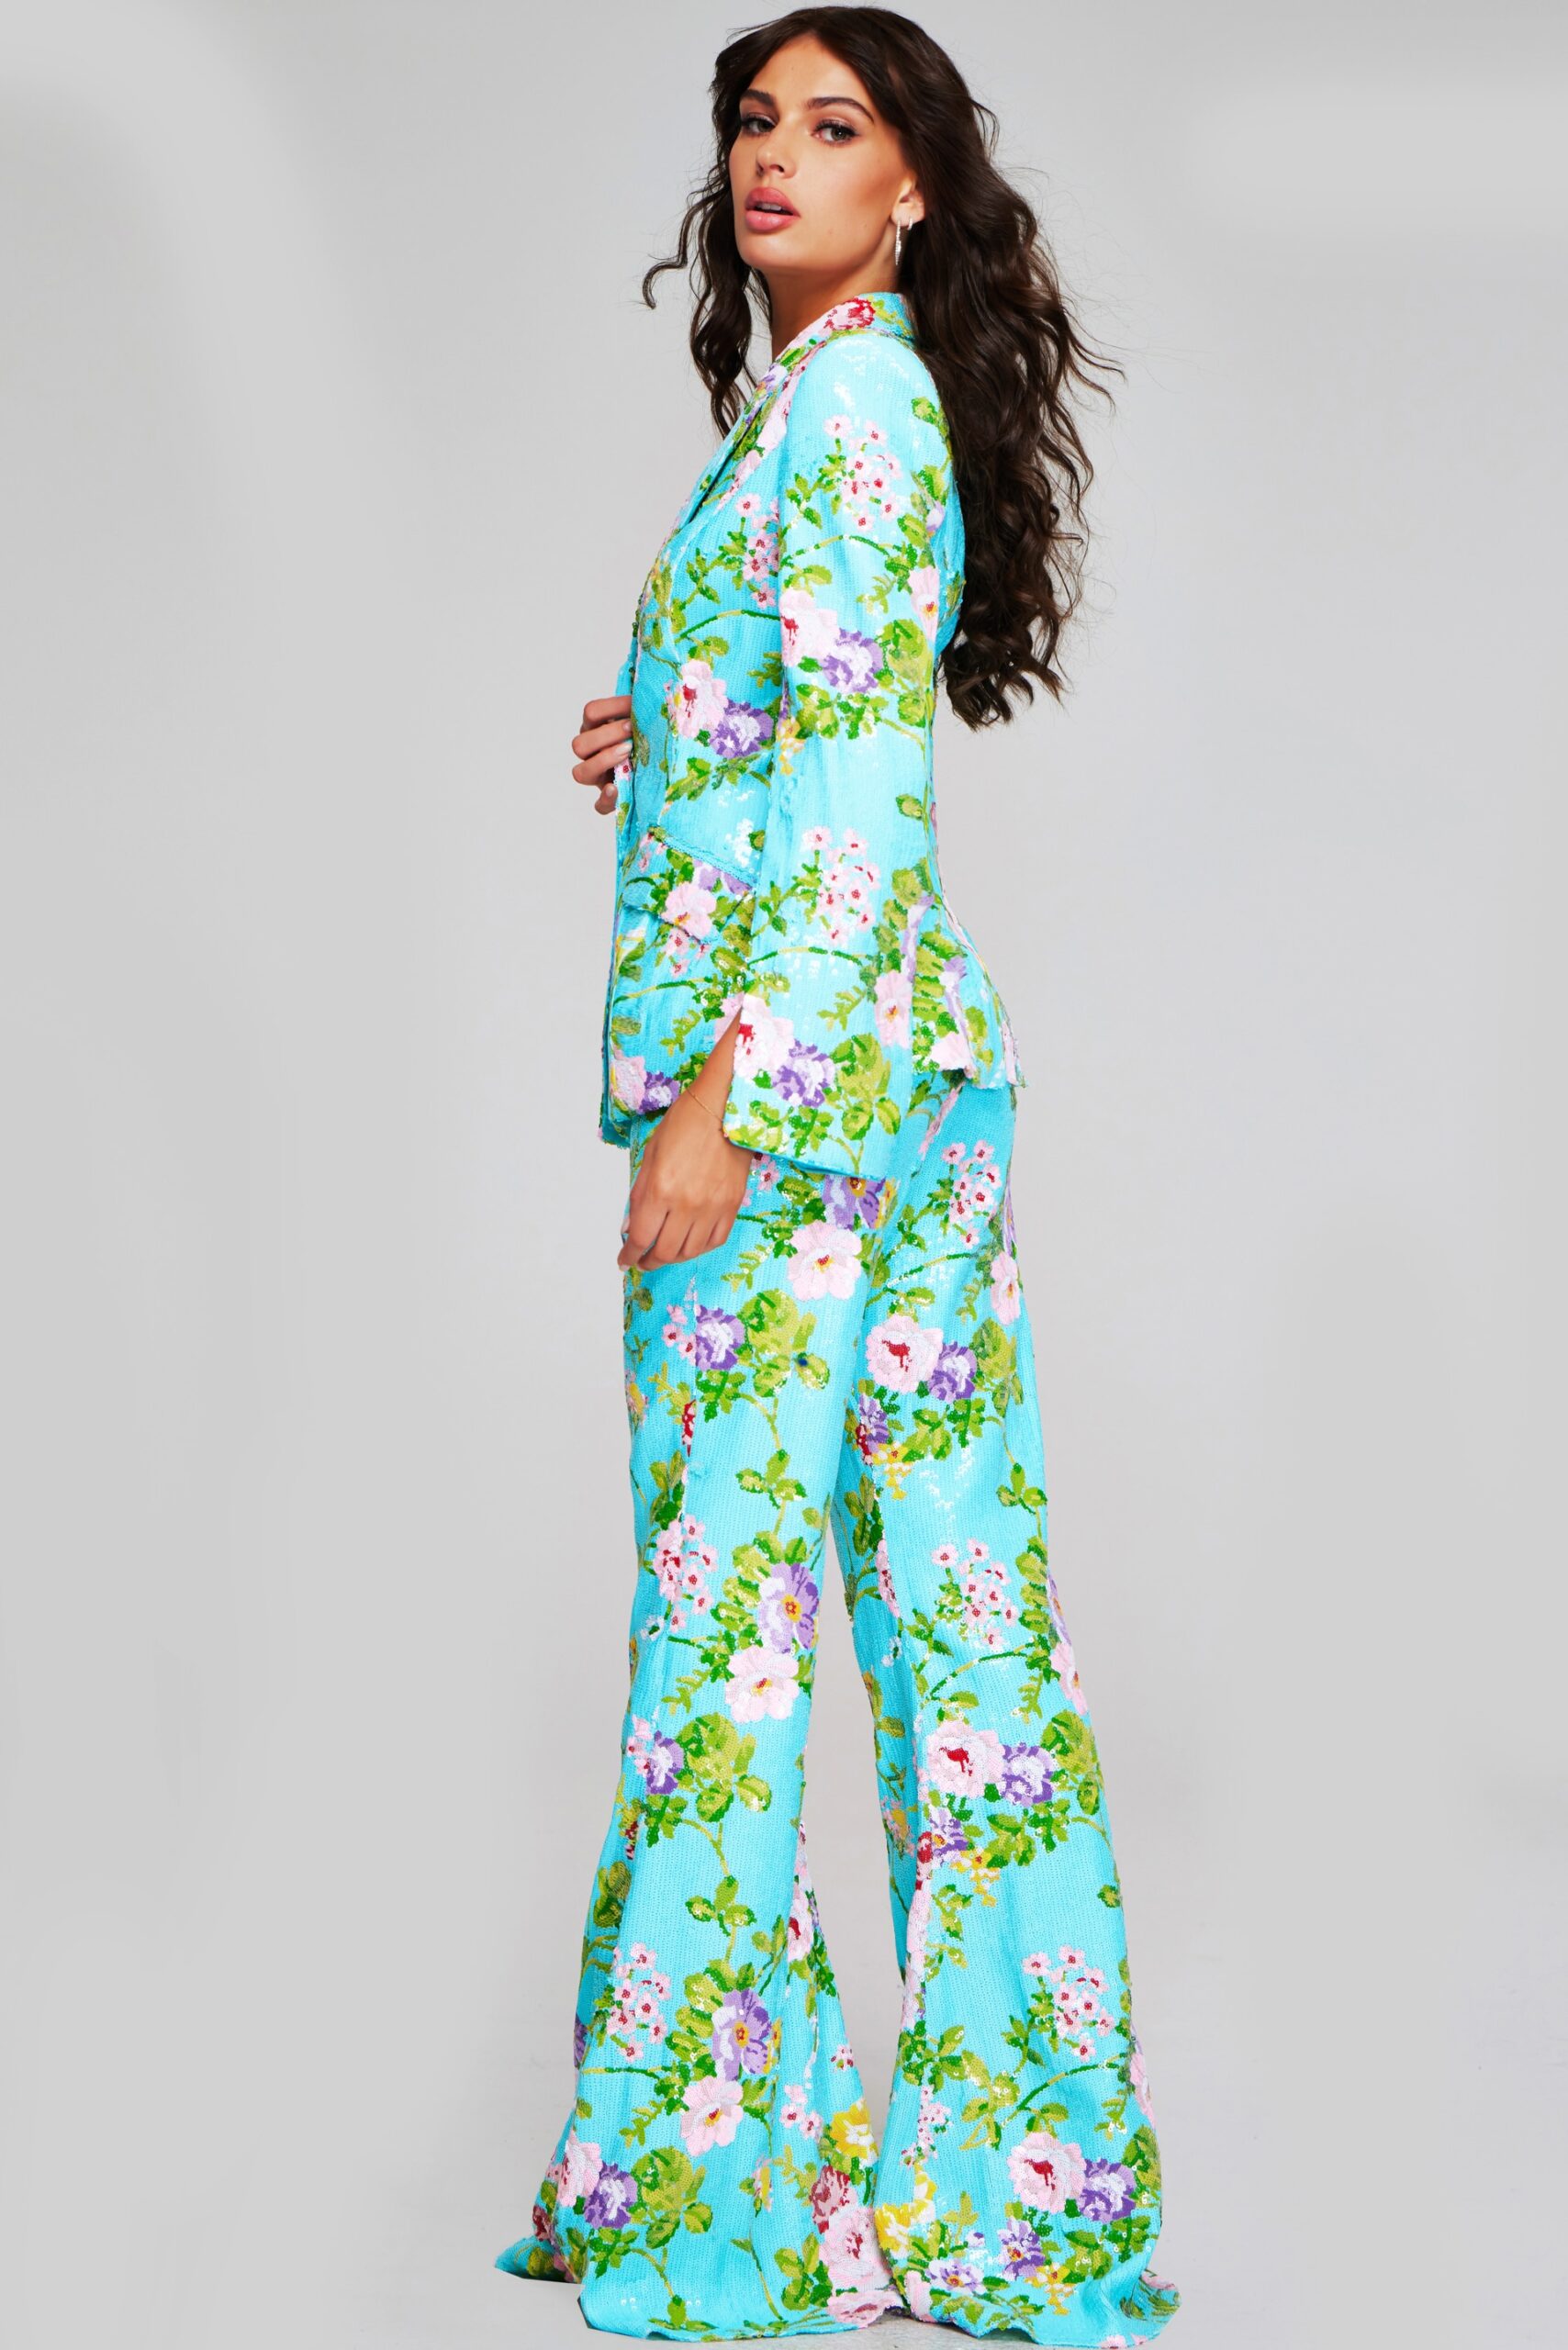 Vibrant Floral Print Bell Sleeve Pant Suit 42146